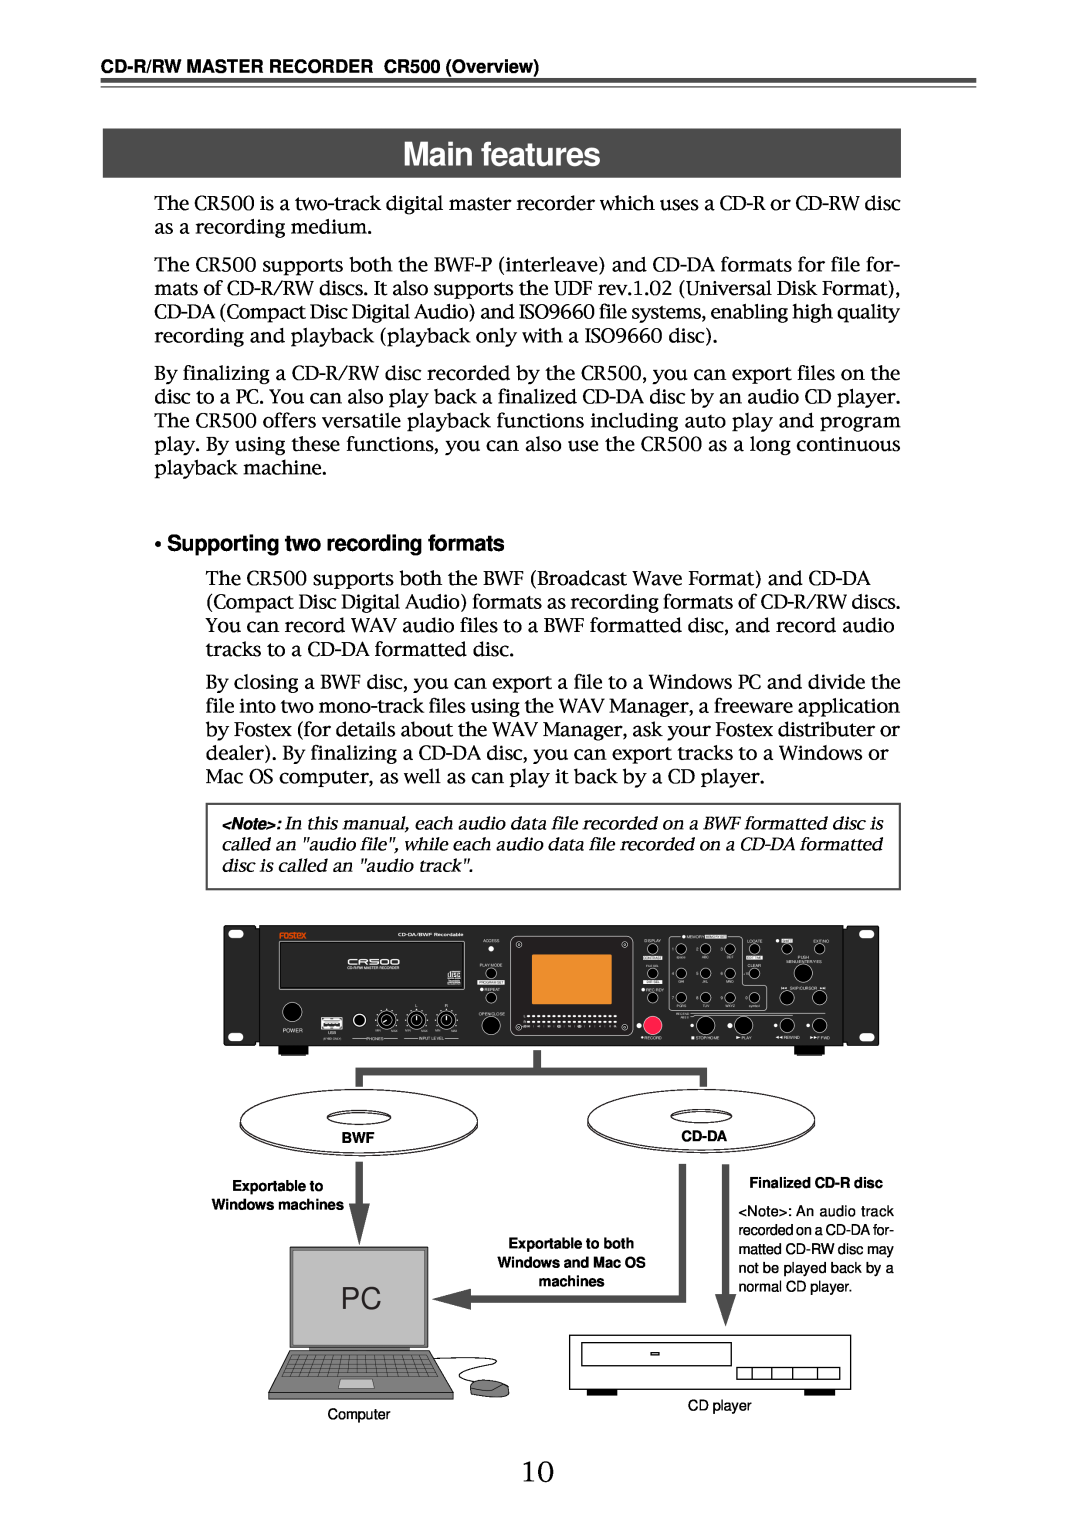 Fostex owner manual Main features, • Supporting two recording formats, CD-R/RWMASTER RECORDER CR500 Overview 